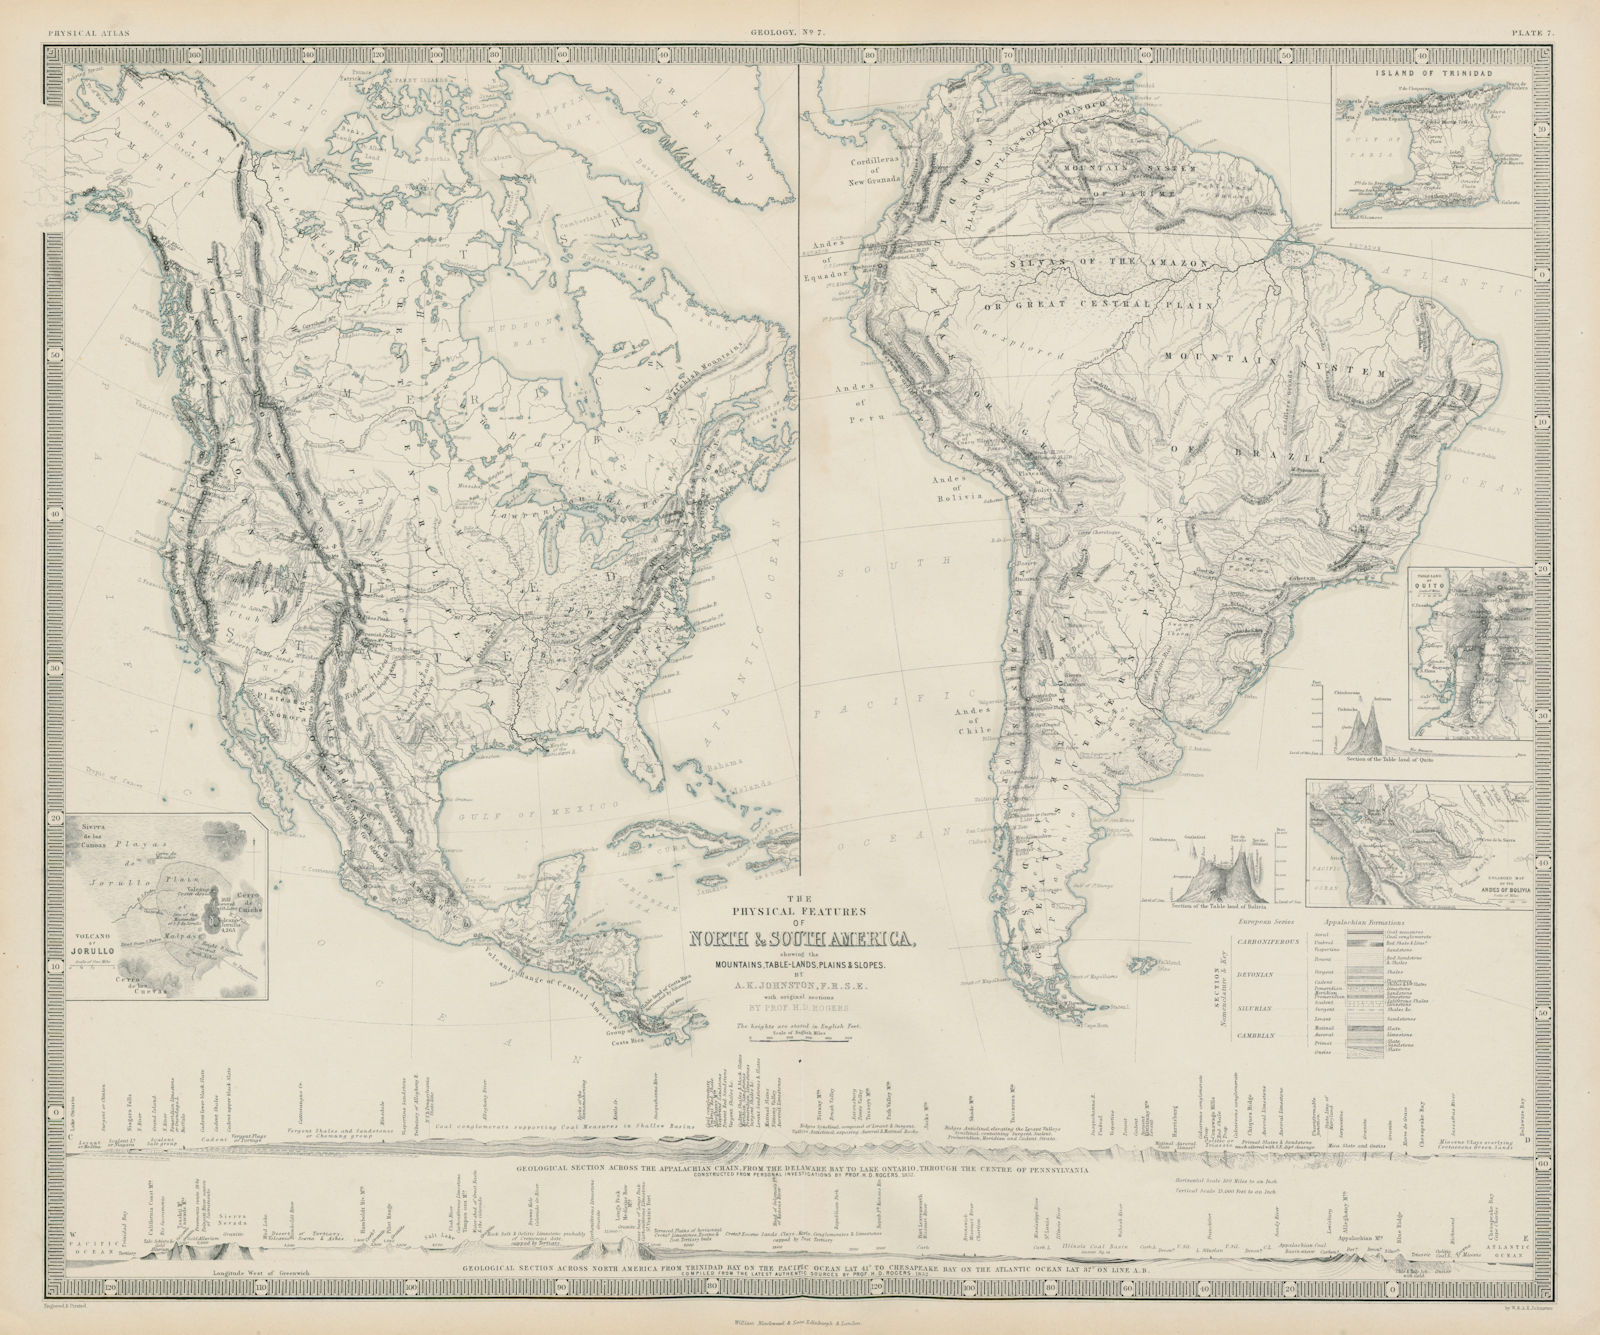 Associate Product Physical Features of North & South America. Mountains rivers sections 1856 map